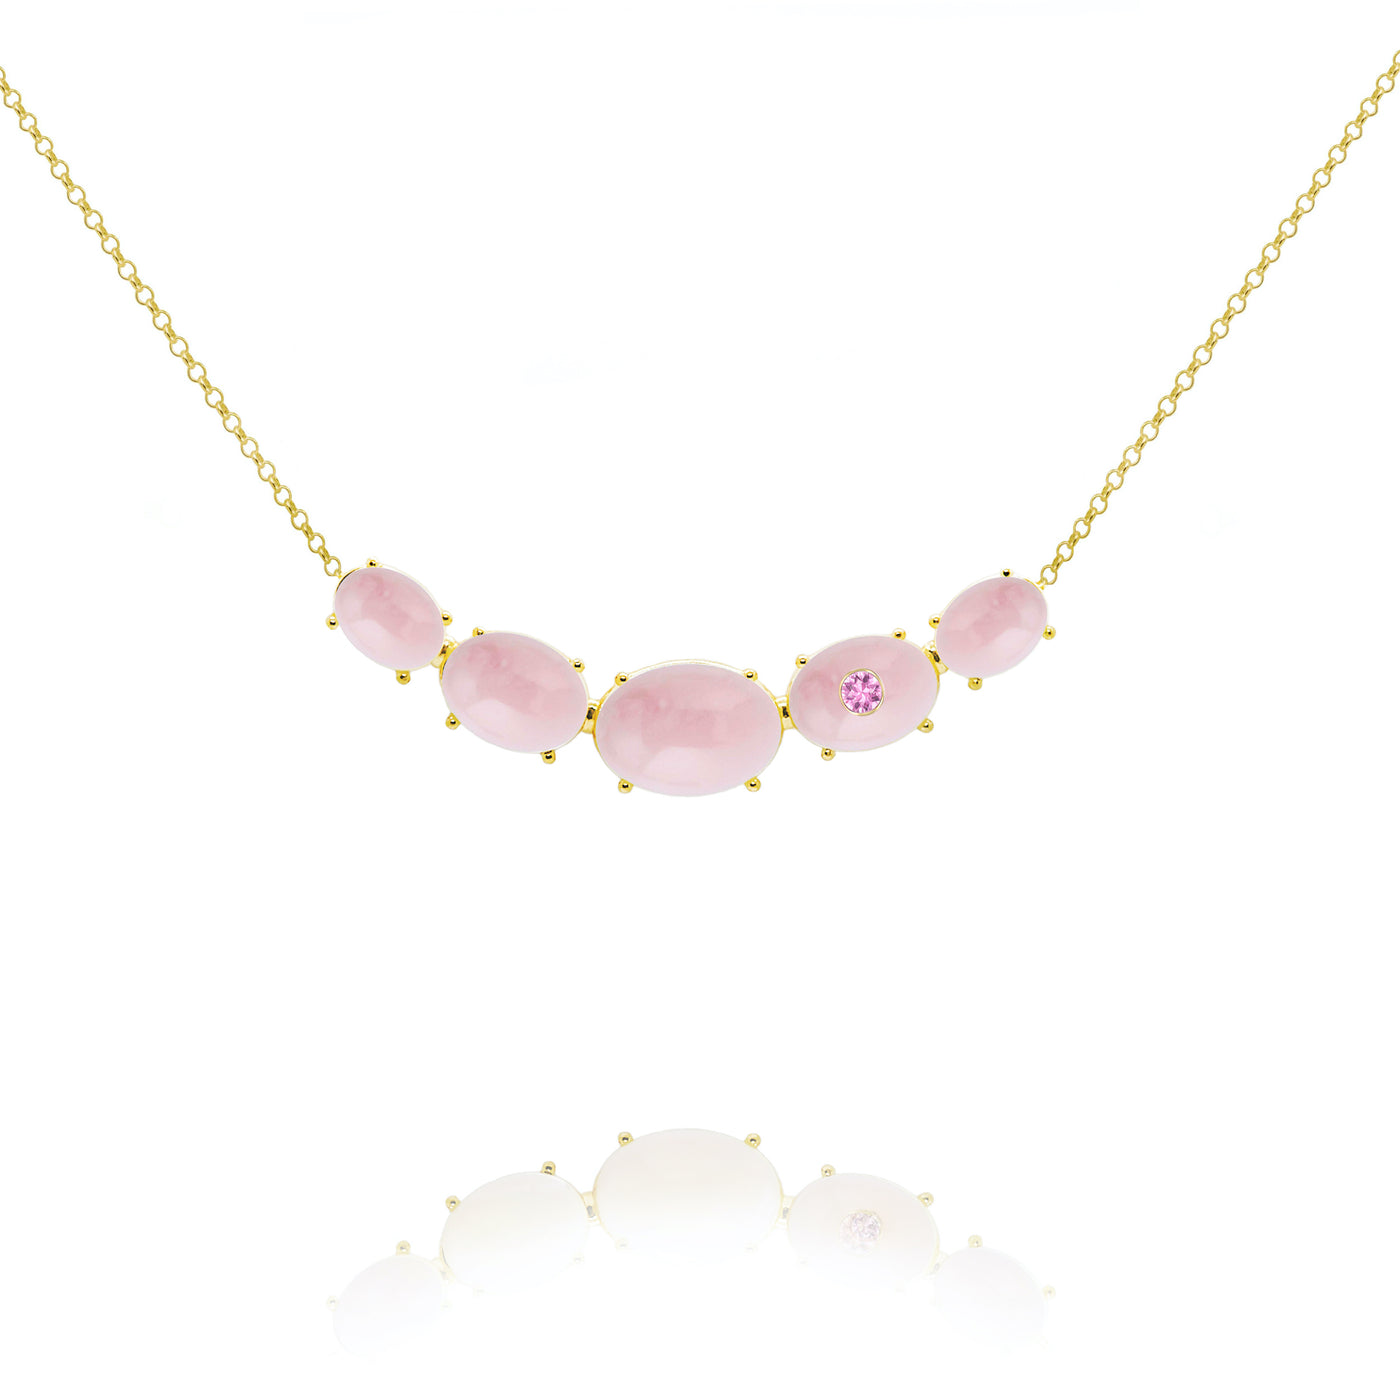 fine jewelry necklace in gold with pink opal and pink tourmaline gemstones from Atelier ORMAN